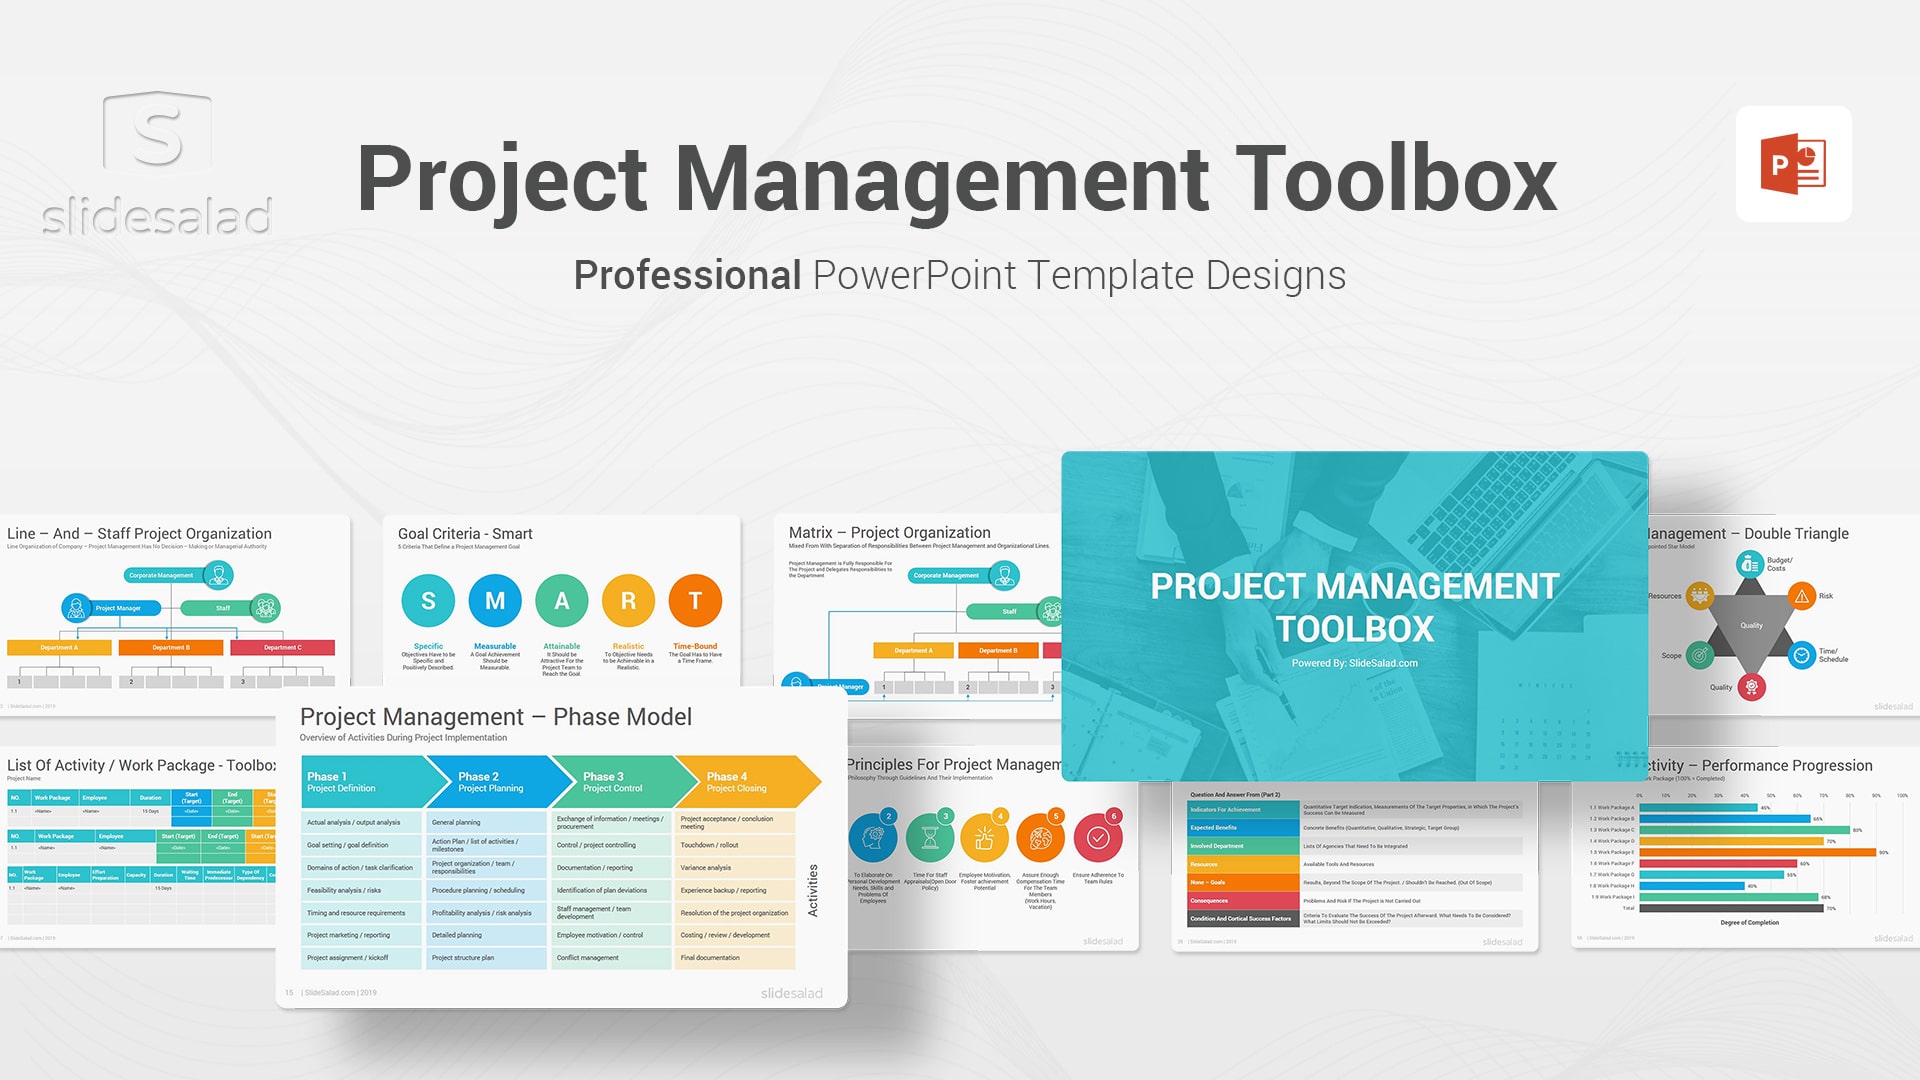 Project Management Toolbox PowerPoint Template